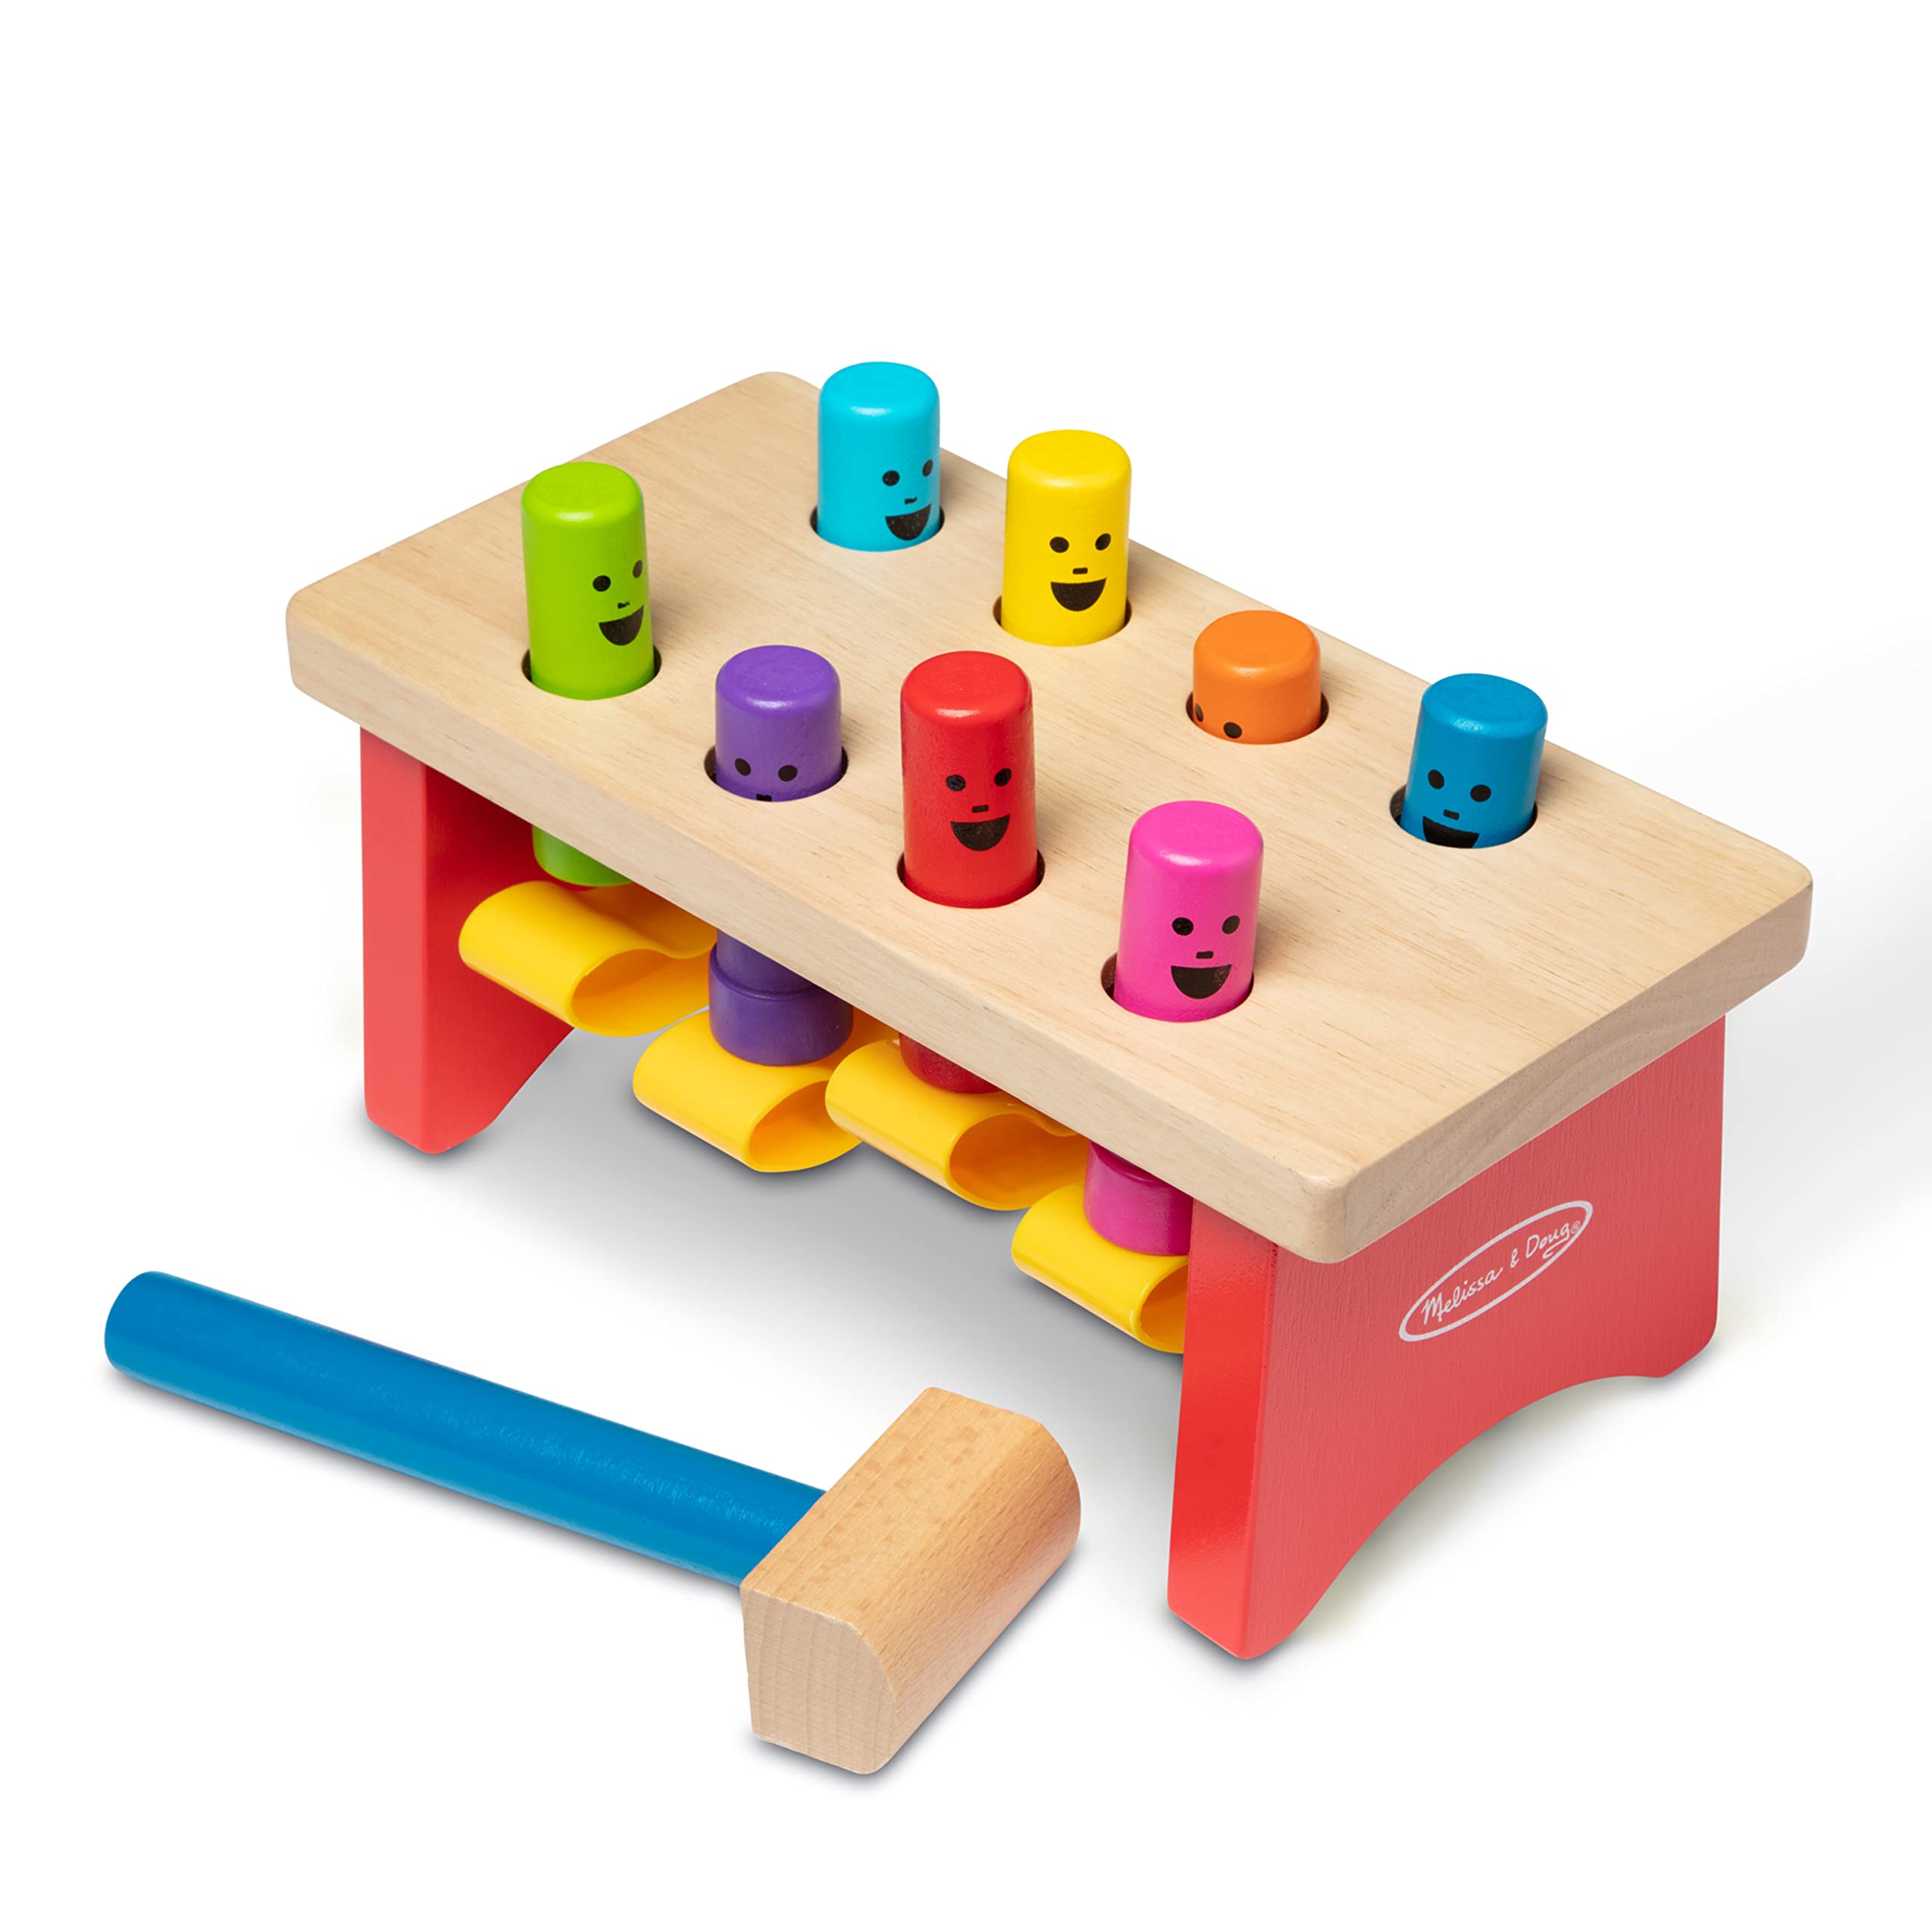 Melissa & Doug Deluxe Pounding Bench Wooden Toy With Mallet - STEAM Toddler Toy